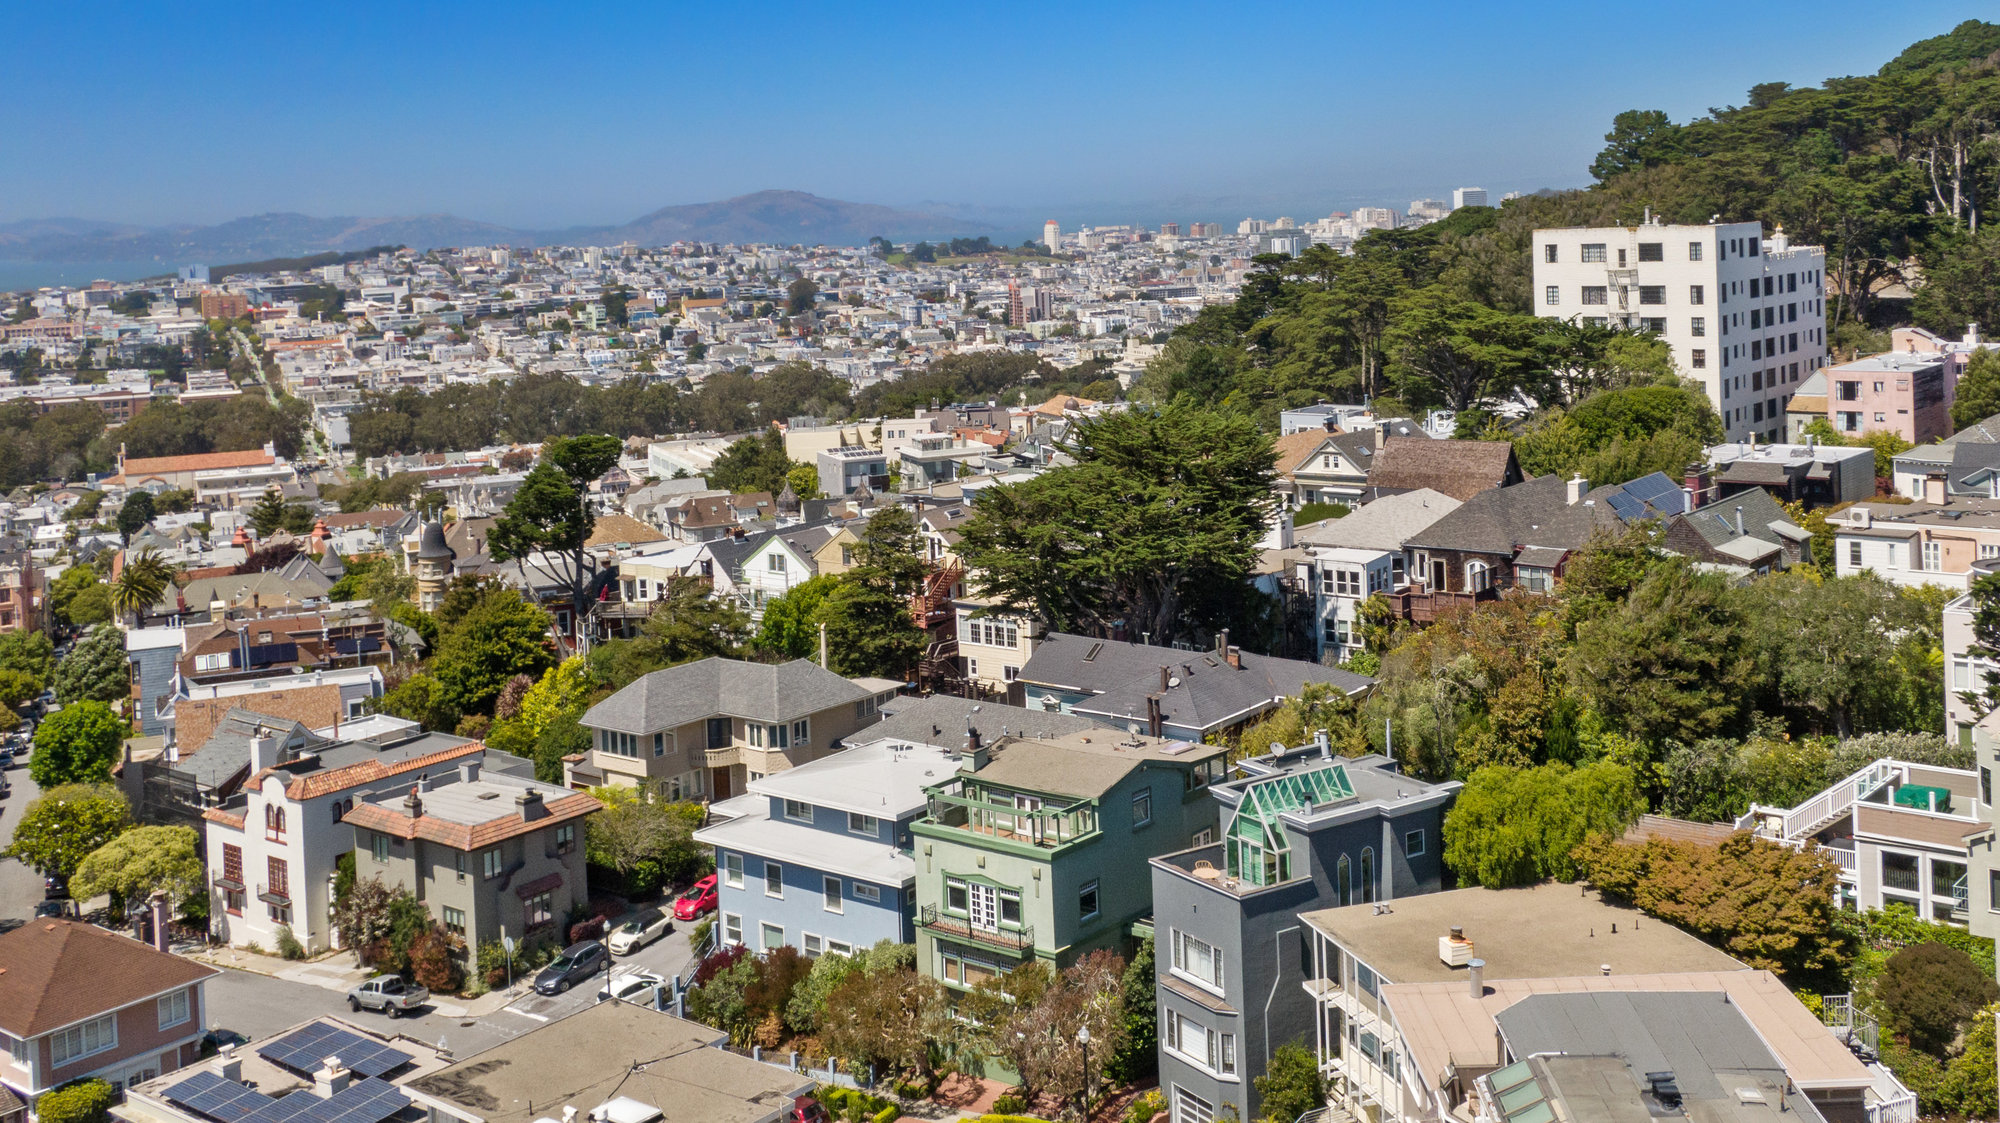 Property Photo: Aerial view of listing 4 Ashbury Terrace, showing proximity to Buena Vista Park and downtown San Francisco 